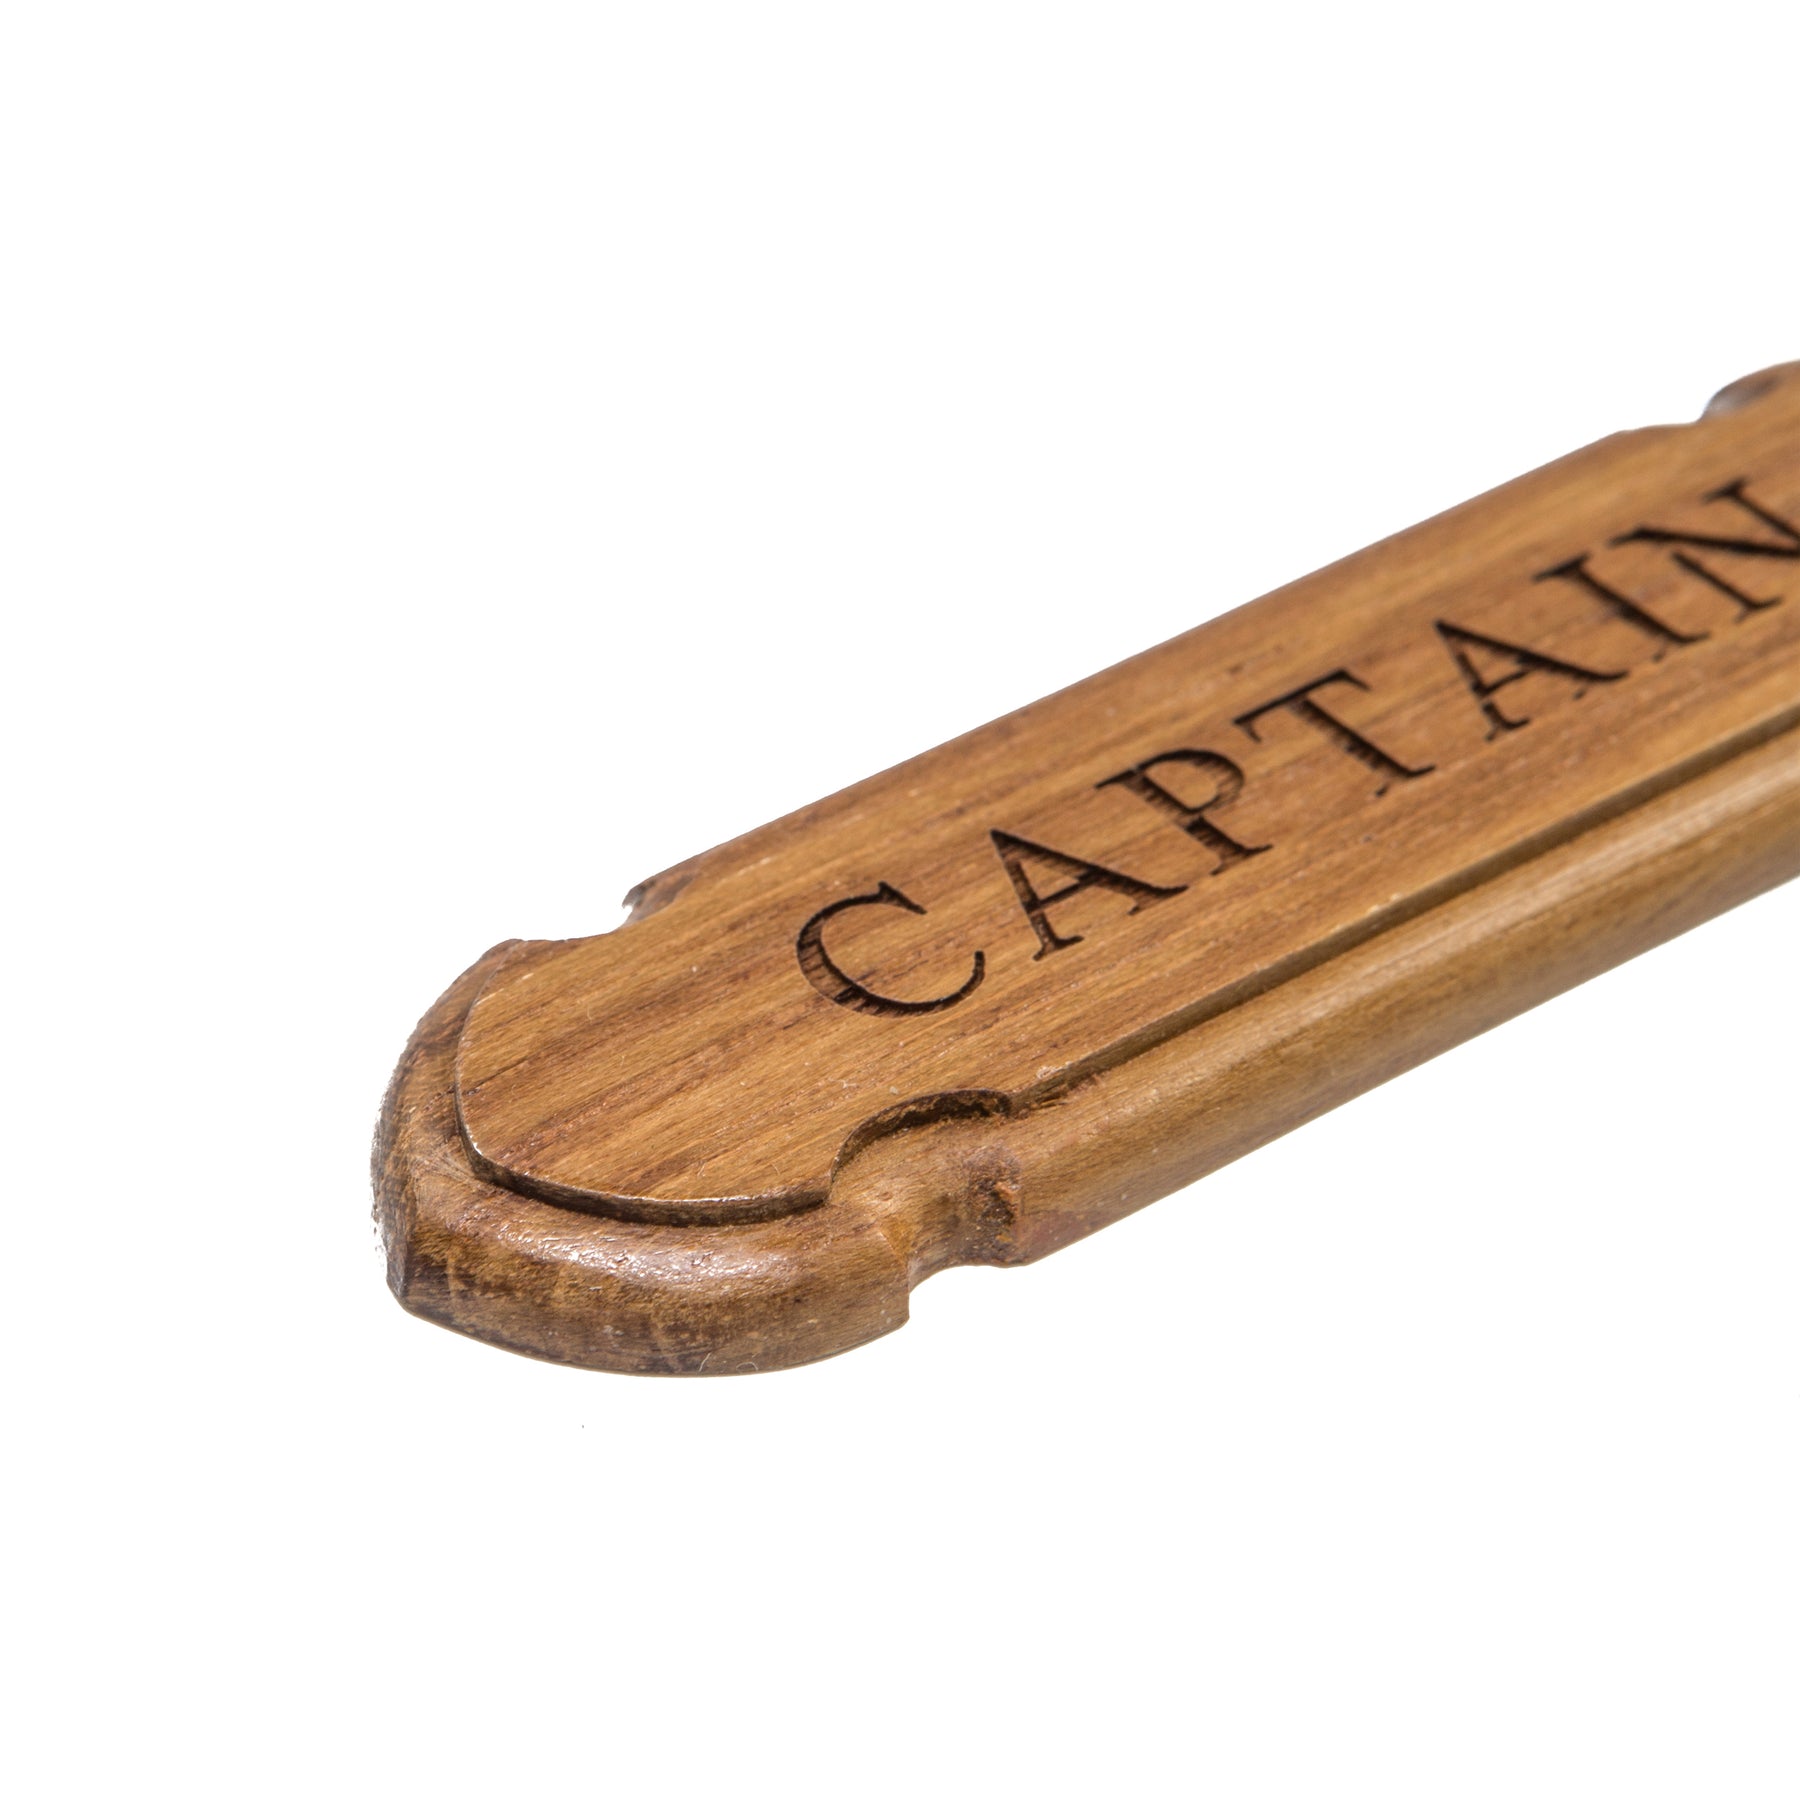 Captain Name Plate - 62670